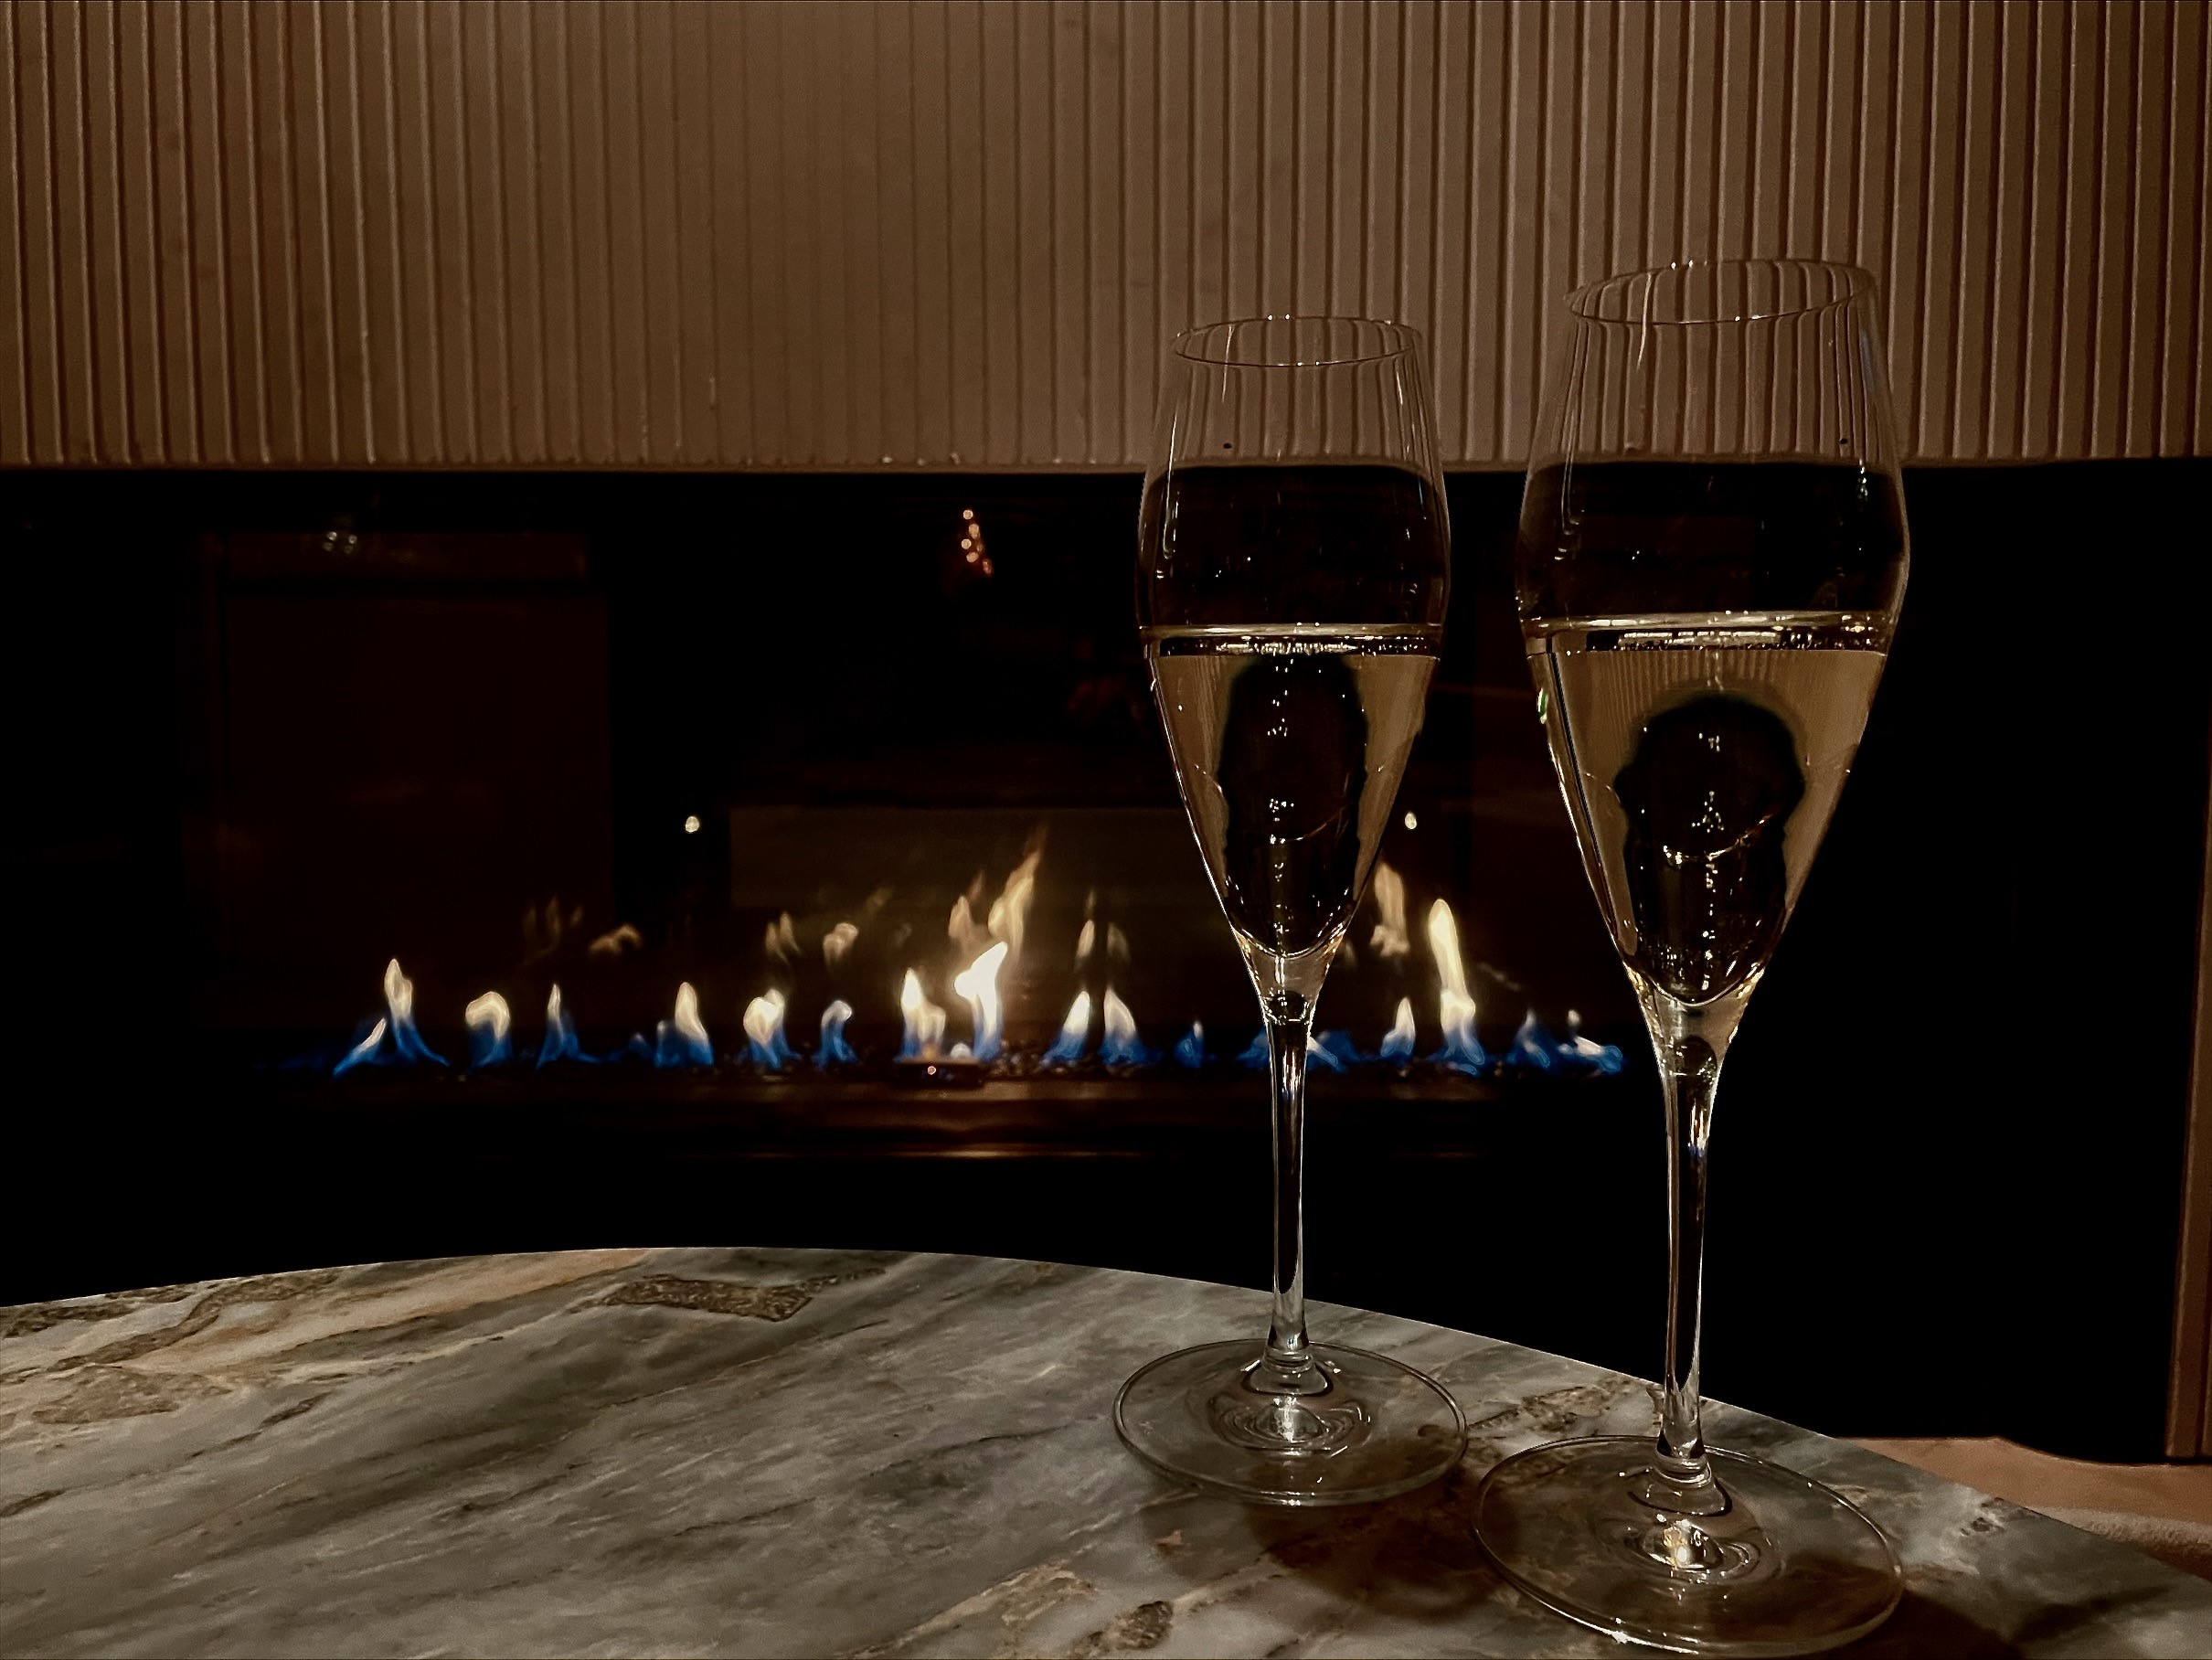 Two glasses of champagne sitting on a table by the warm fire.